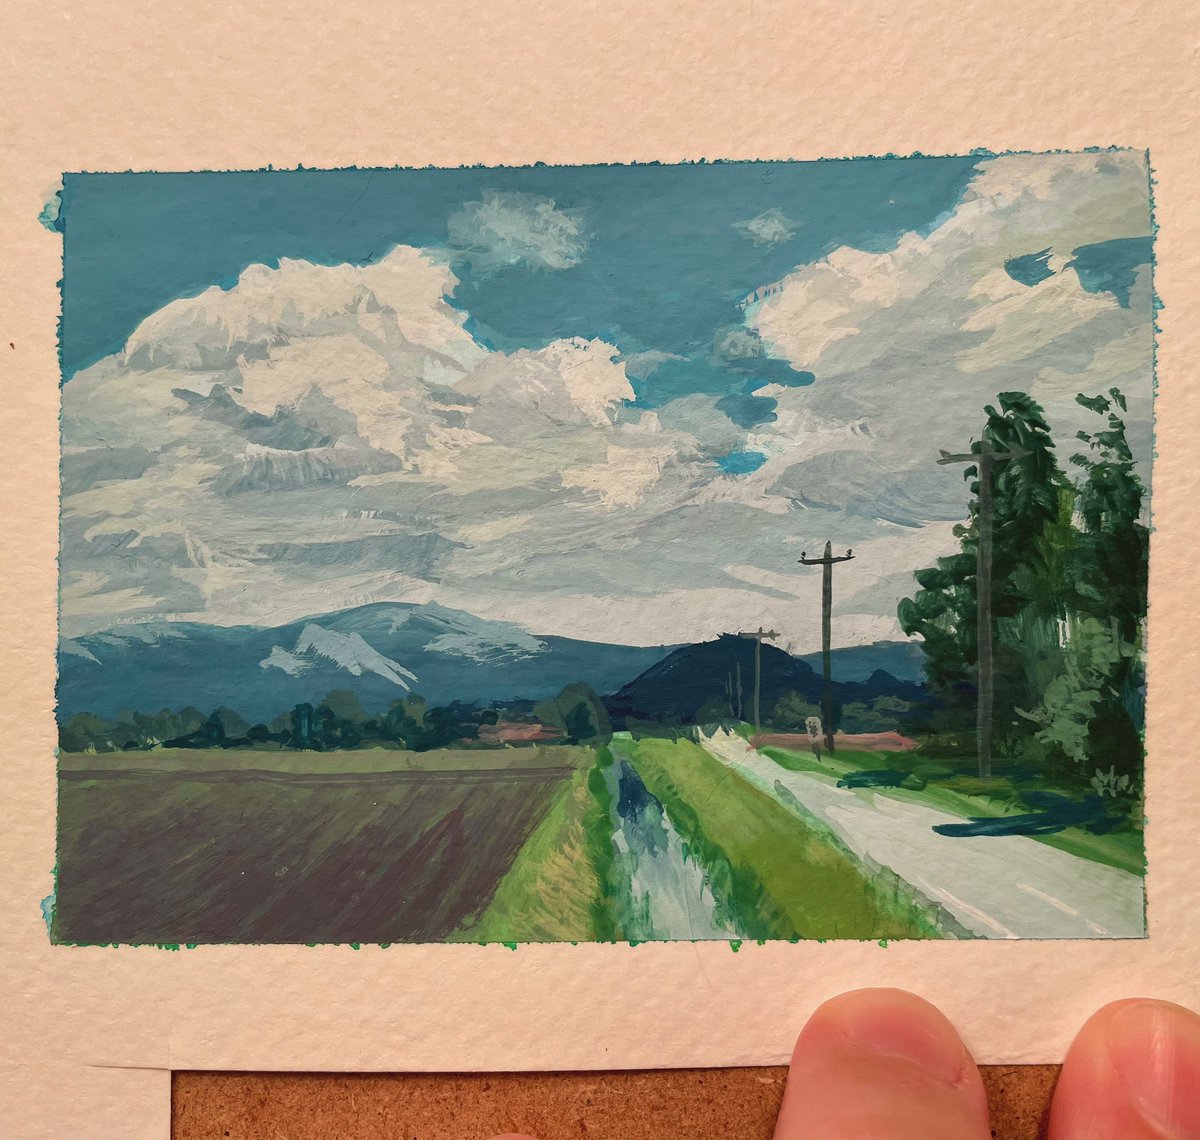 I also made this itty bitty gouache landscape today ;u;